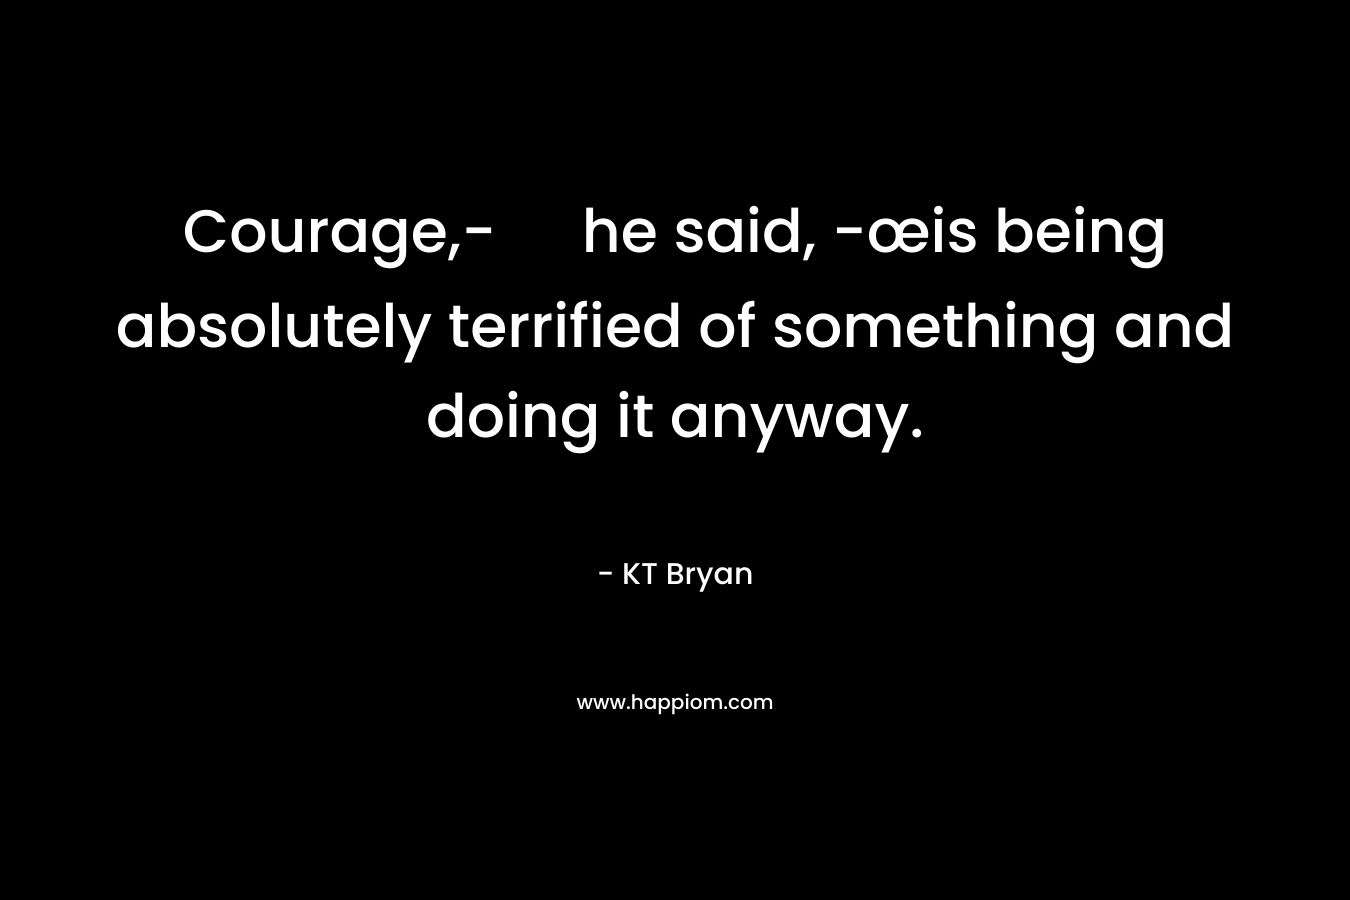 Courage,- he said, -œis being absolutely terrified of something and doing it anyway.